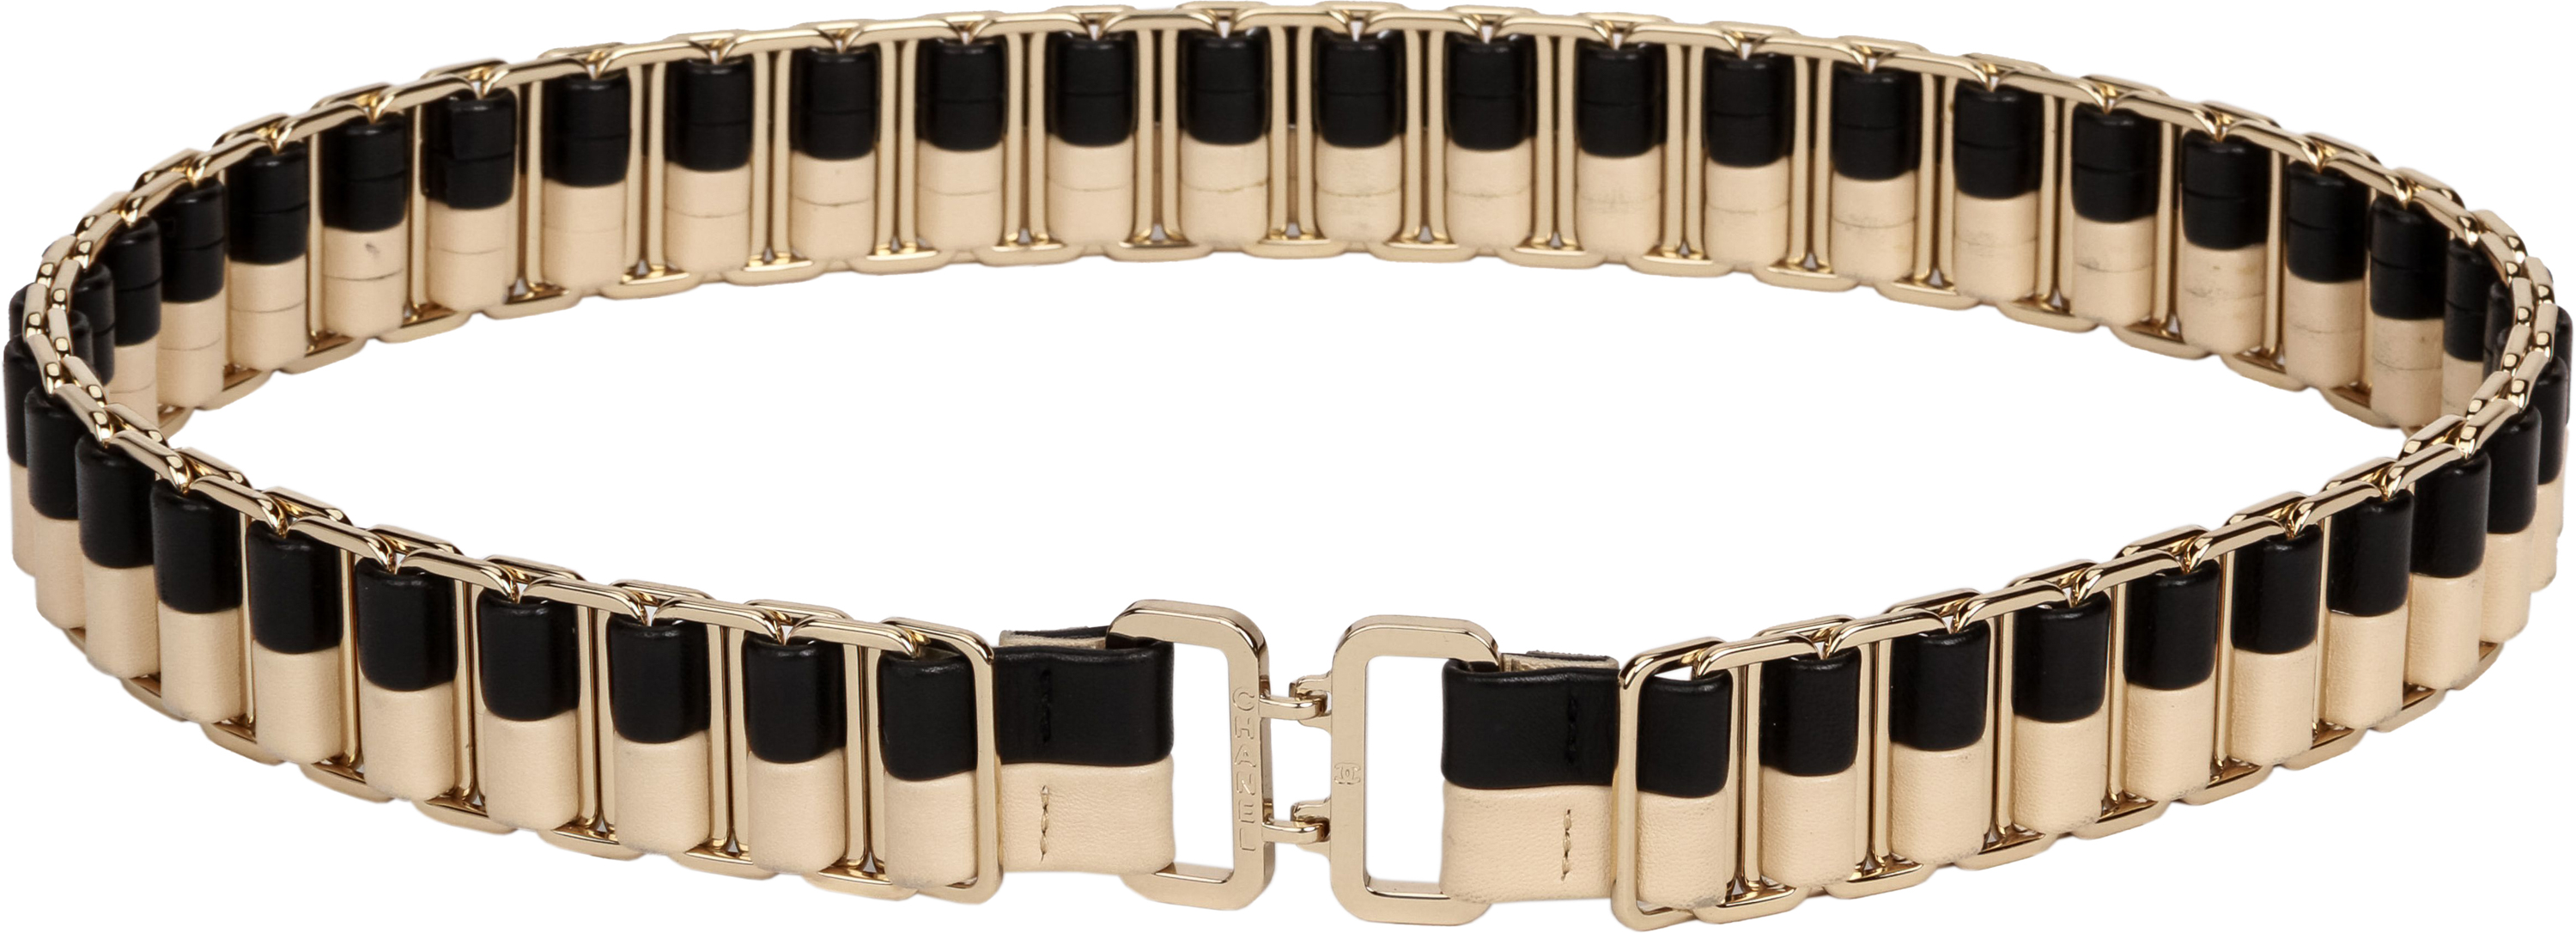 Chanel Cruise 2005 black and beige belt~P77634315